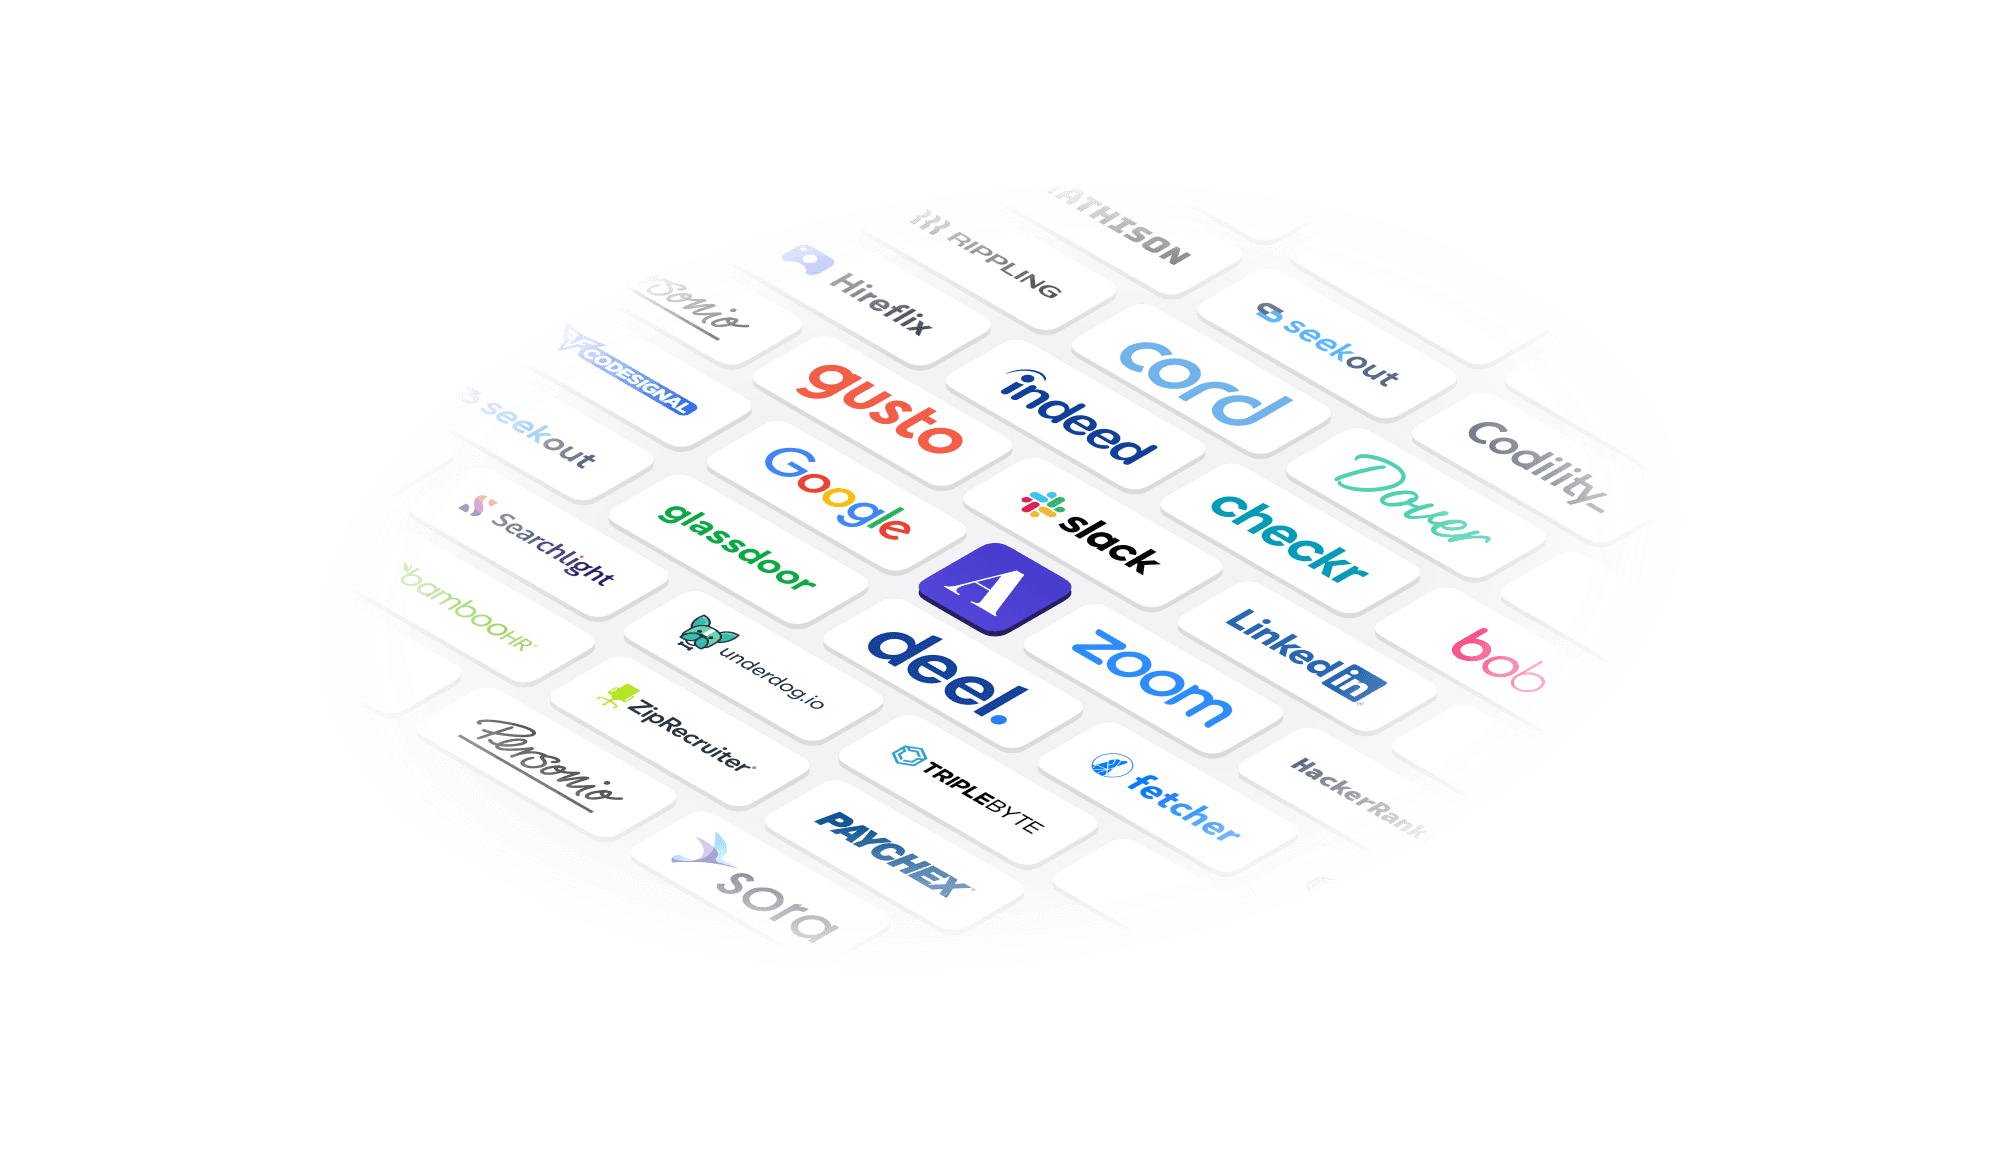 Ashby integrations with tools like Slack, Google, Zoom, and many more.